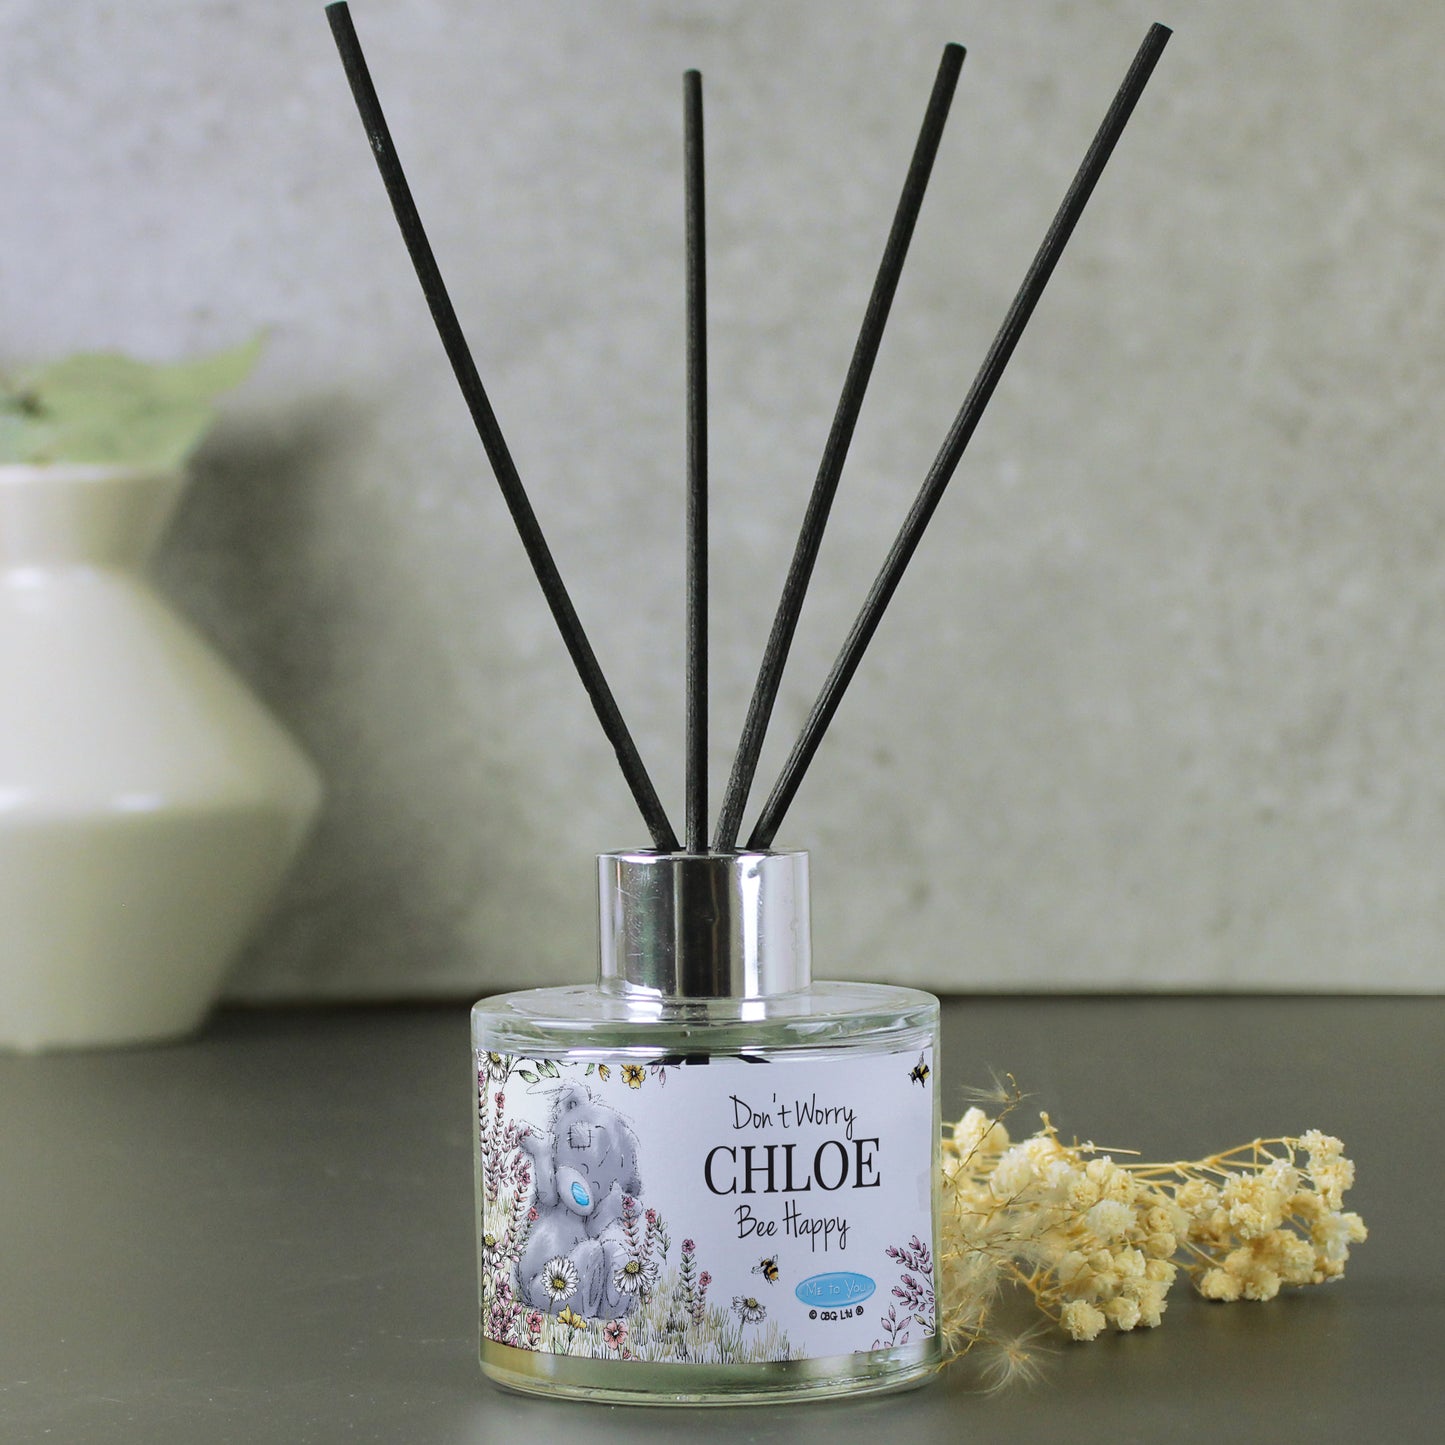 Personalised Me to You Bees Reed Diffuser - Personalise It!